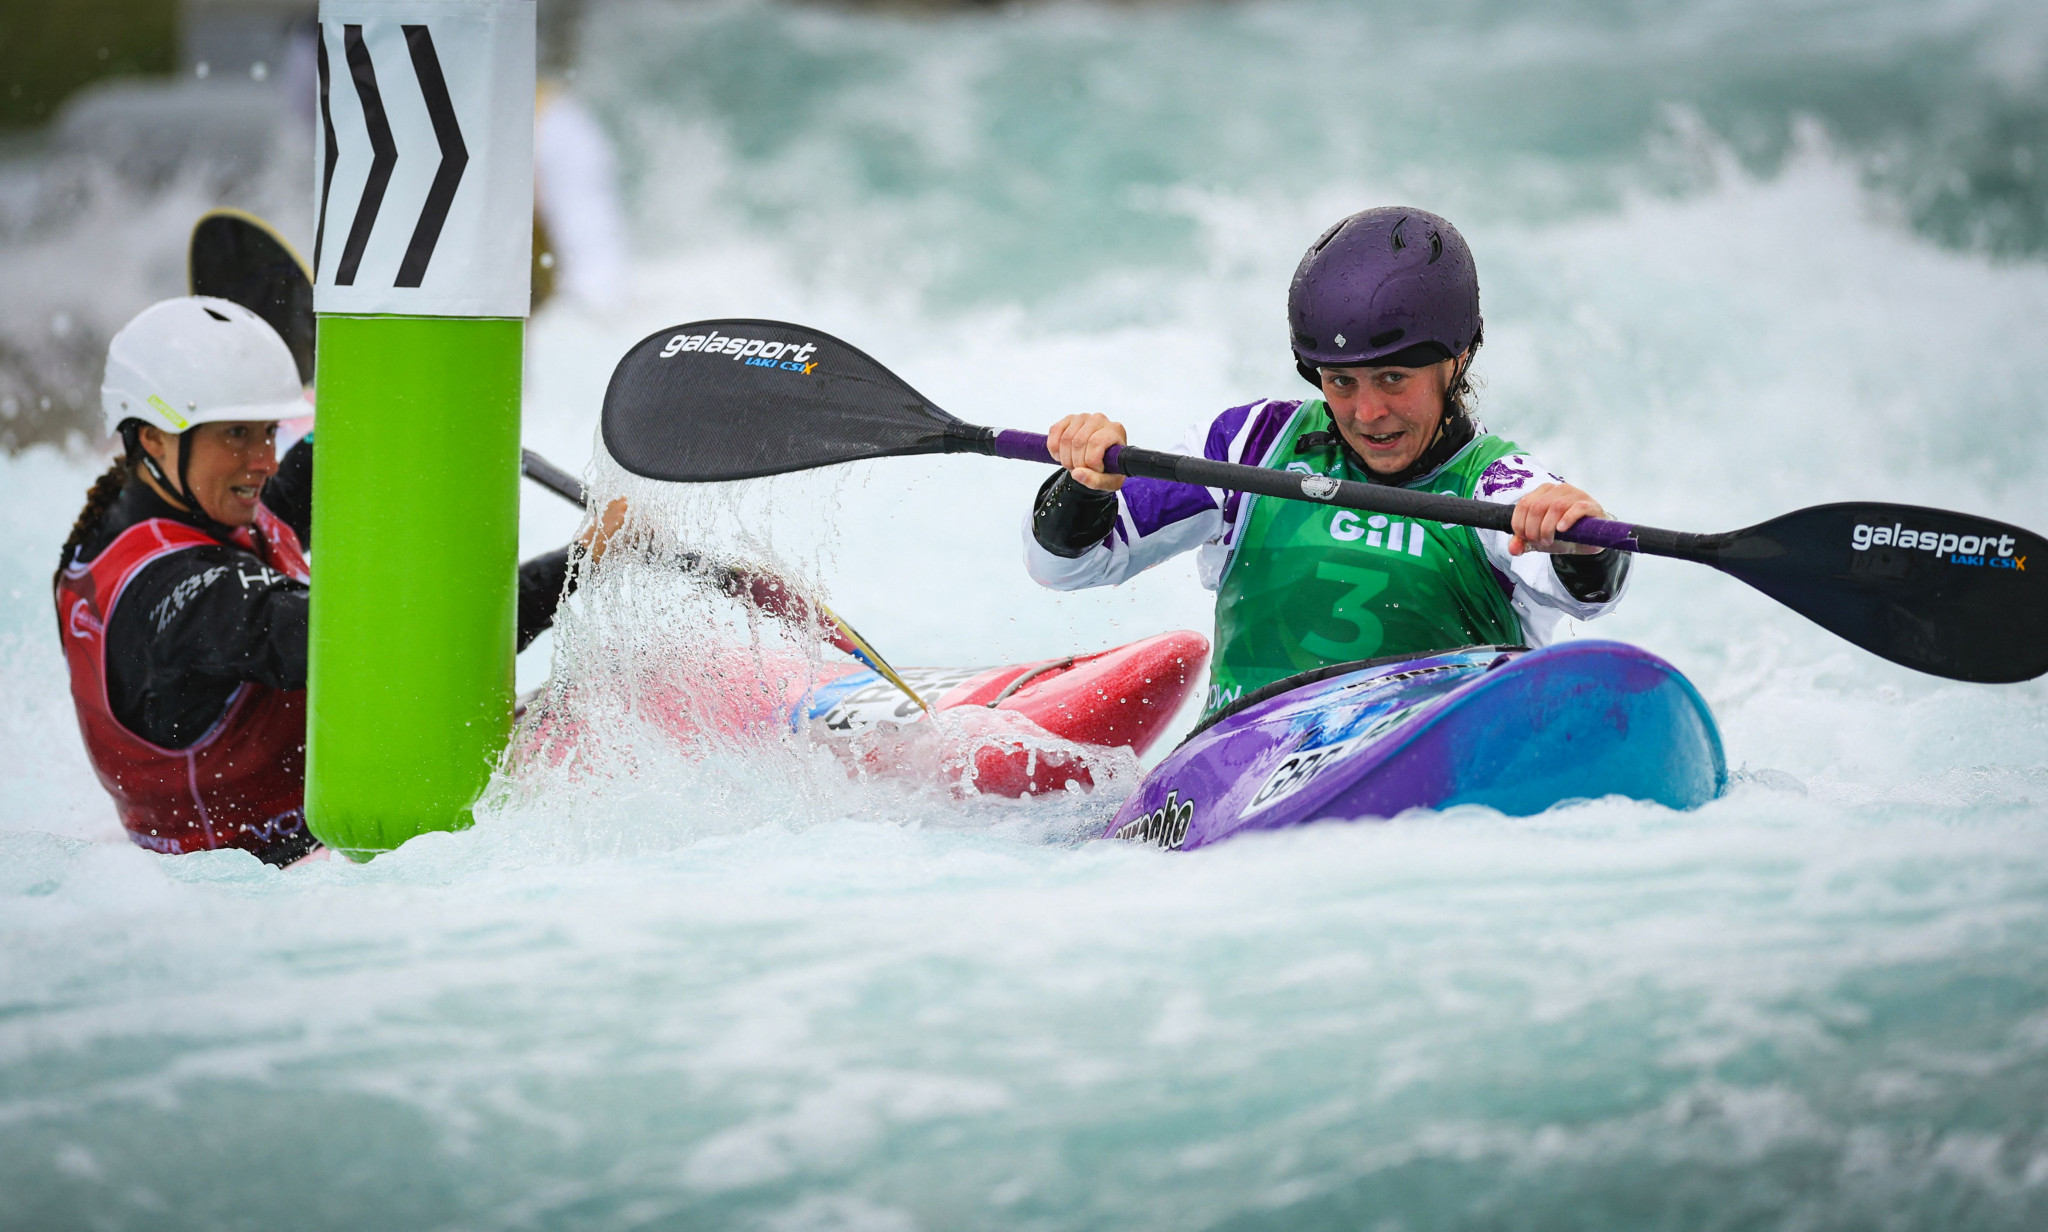 Britain's Kimberly Woods took gold in the women's kayak cross on the final day of the ICF Canoe Slalom World Championships ©Getty Images